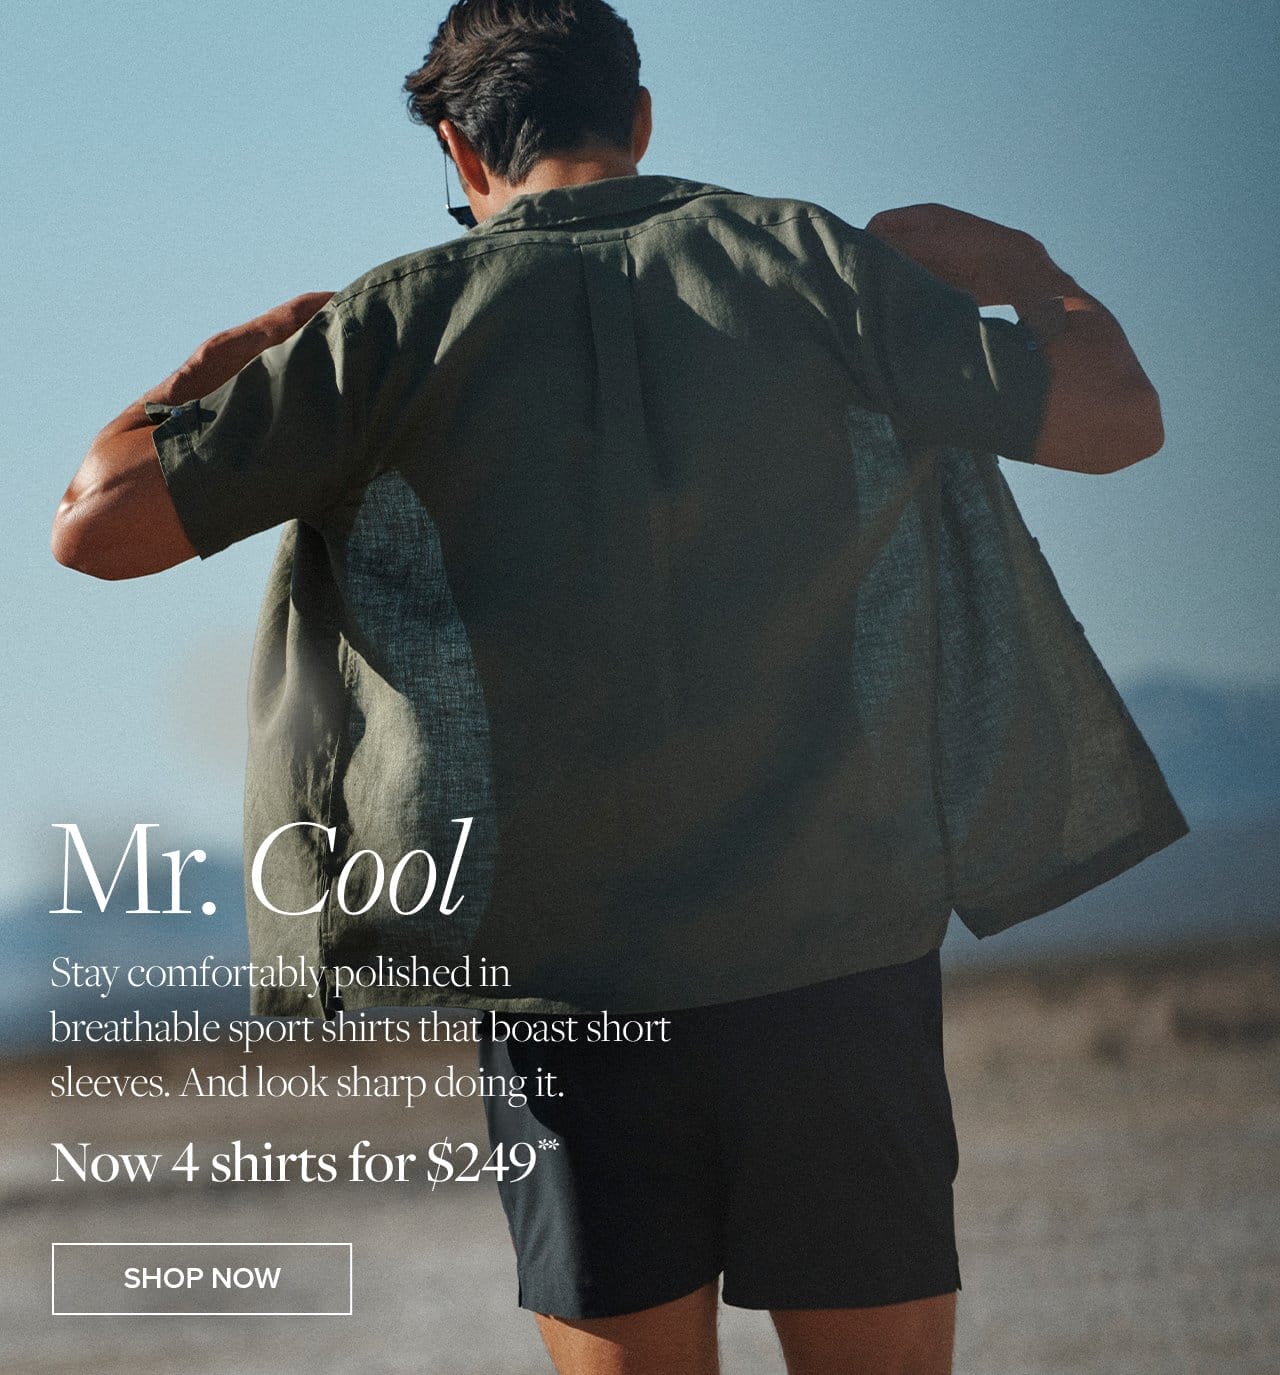 Mr. Cool Stay comfortable polished in breathable sport shirts that boast short sleeves. And look sharp doing it. Now 4 shirts for \\$249 Shop Now